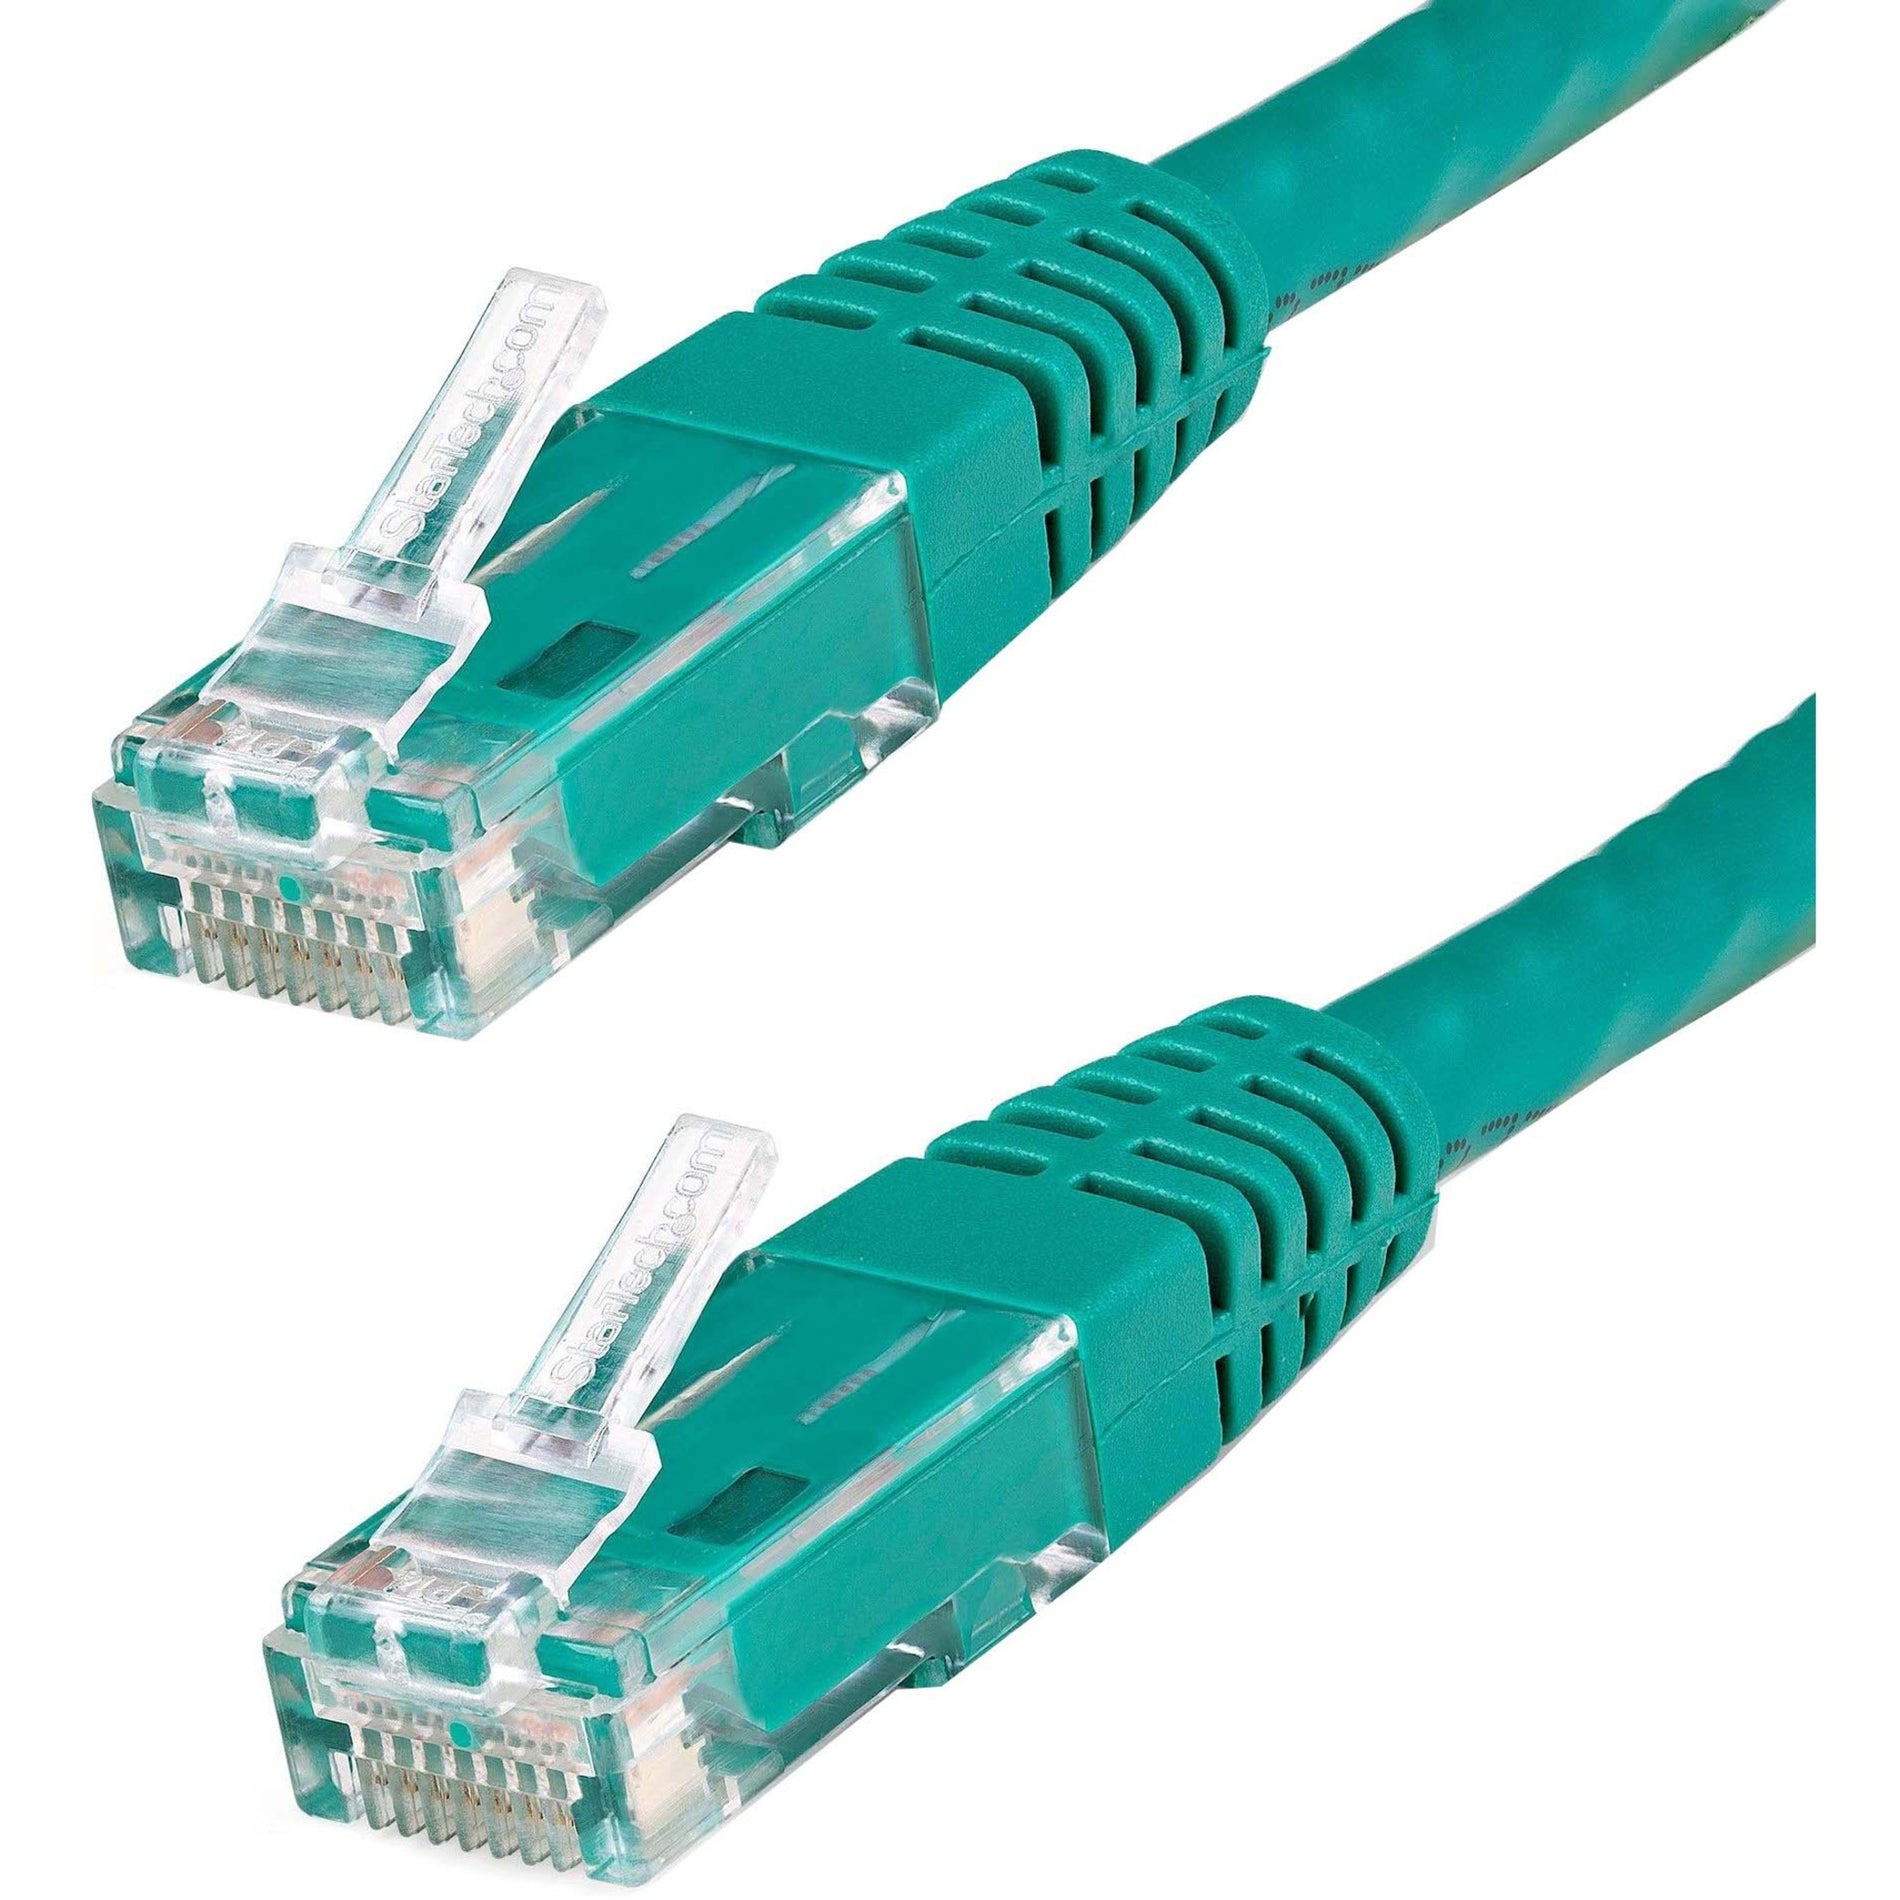 StarTech.com C6PATCH6GN 6ft Green Cat6 UTP Patch Cable ETL Verified, 10 Gbit/s Data Transfer Rate, Strain Relief, Gold Plated Connectors